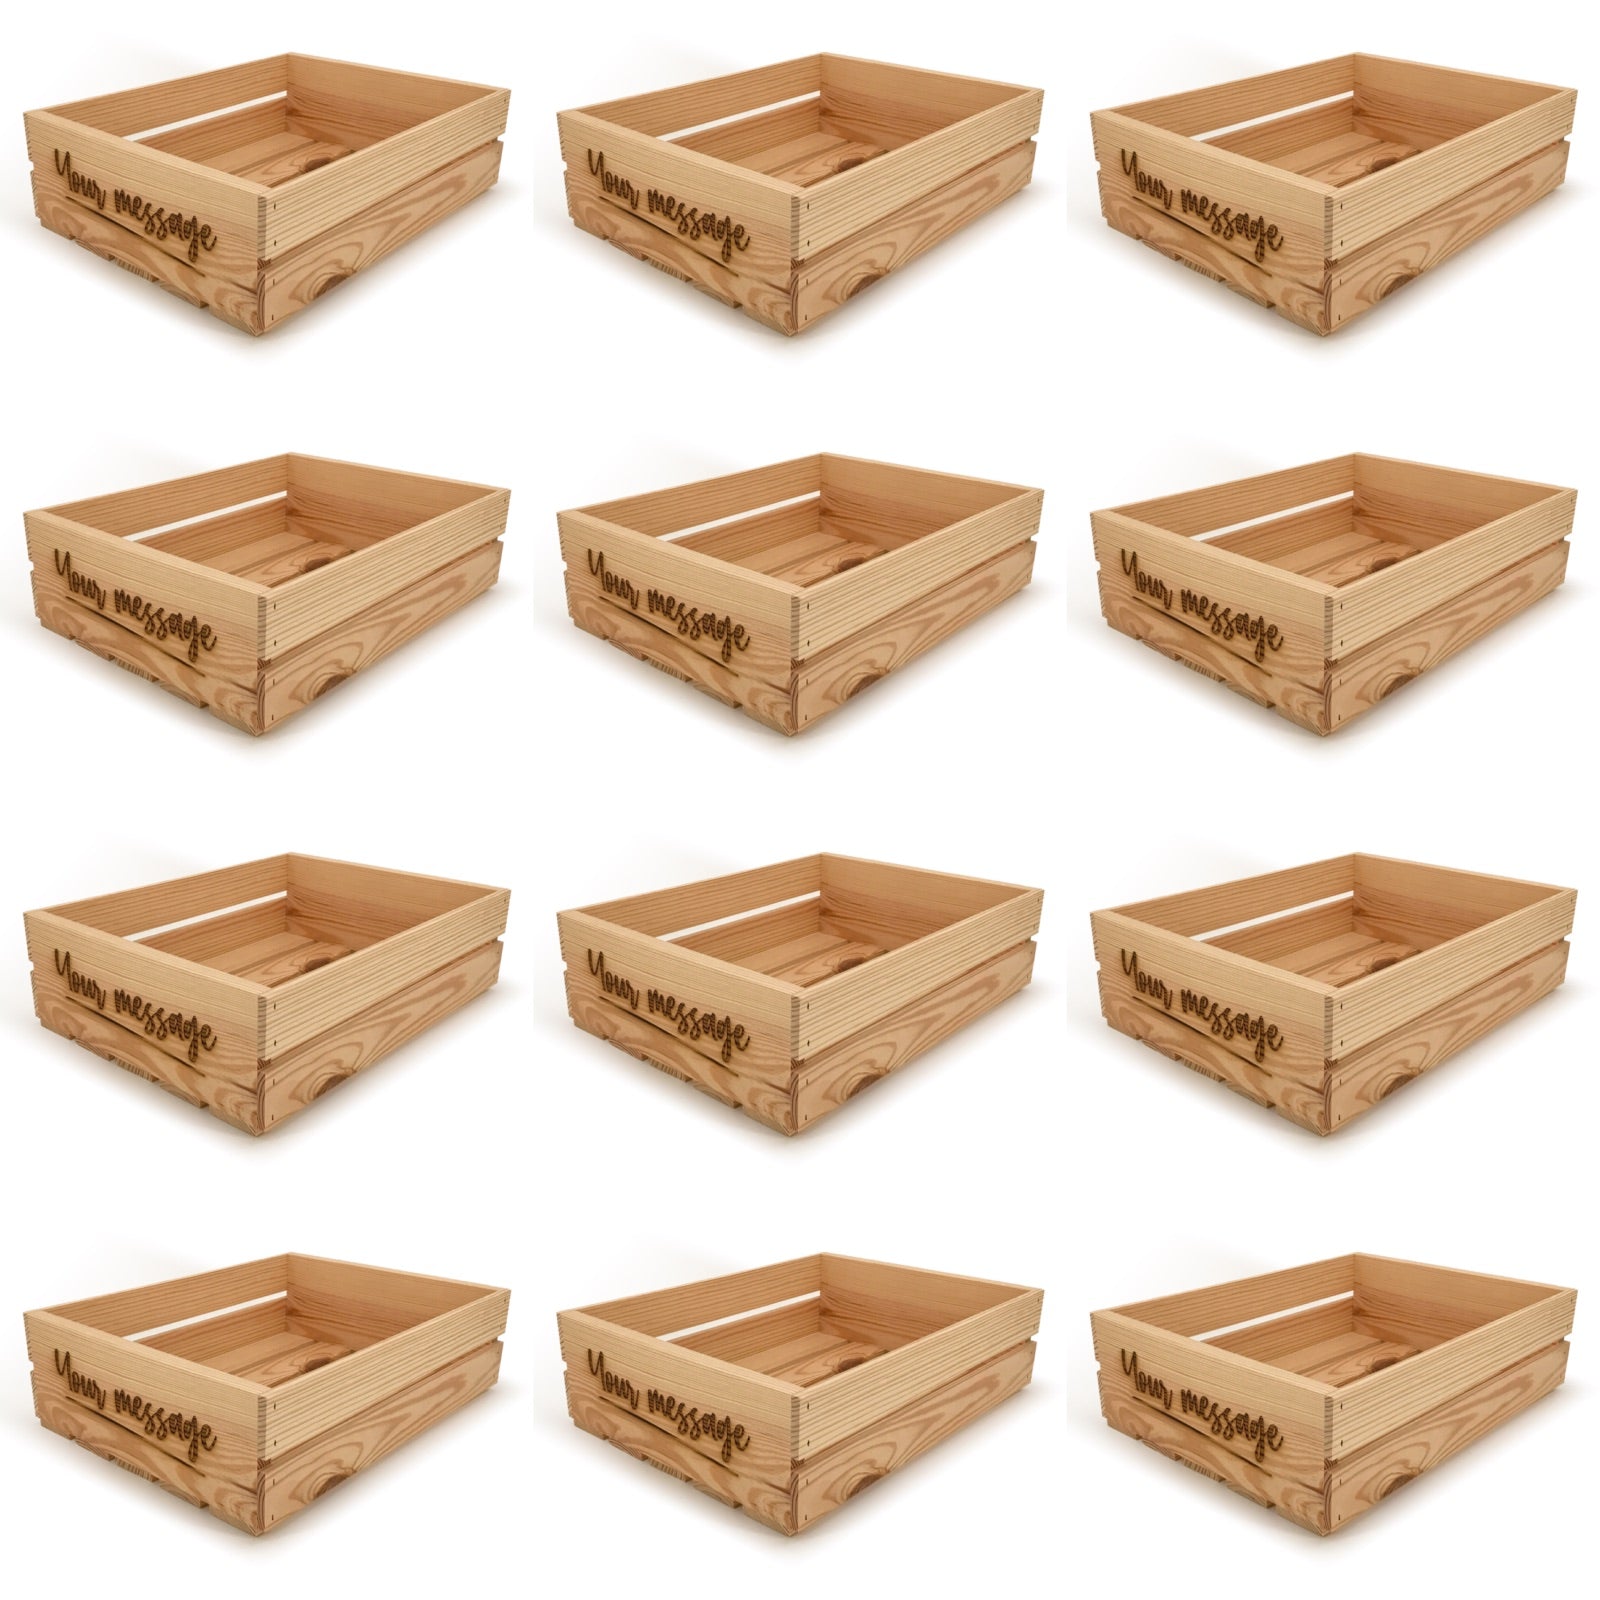 12 Small wooden crates with custom message 18x14x5.25